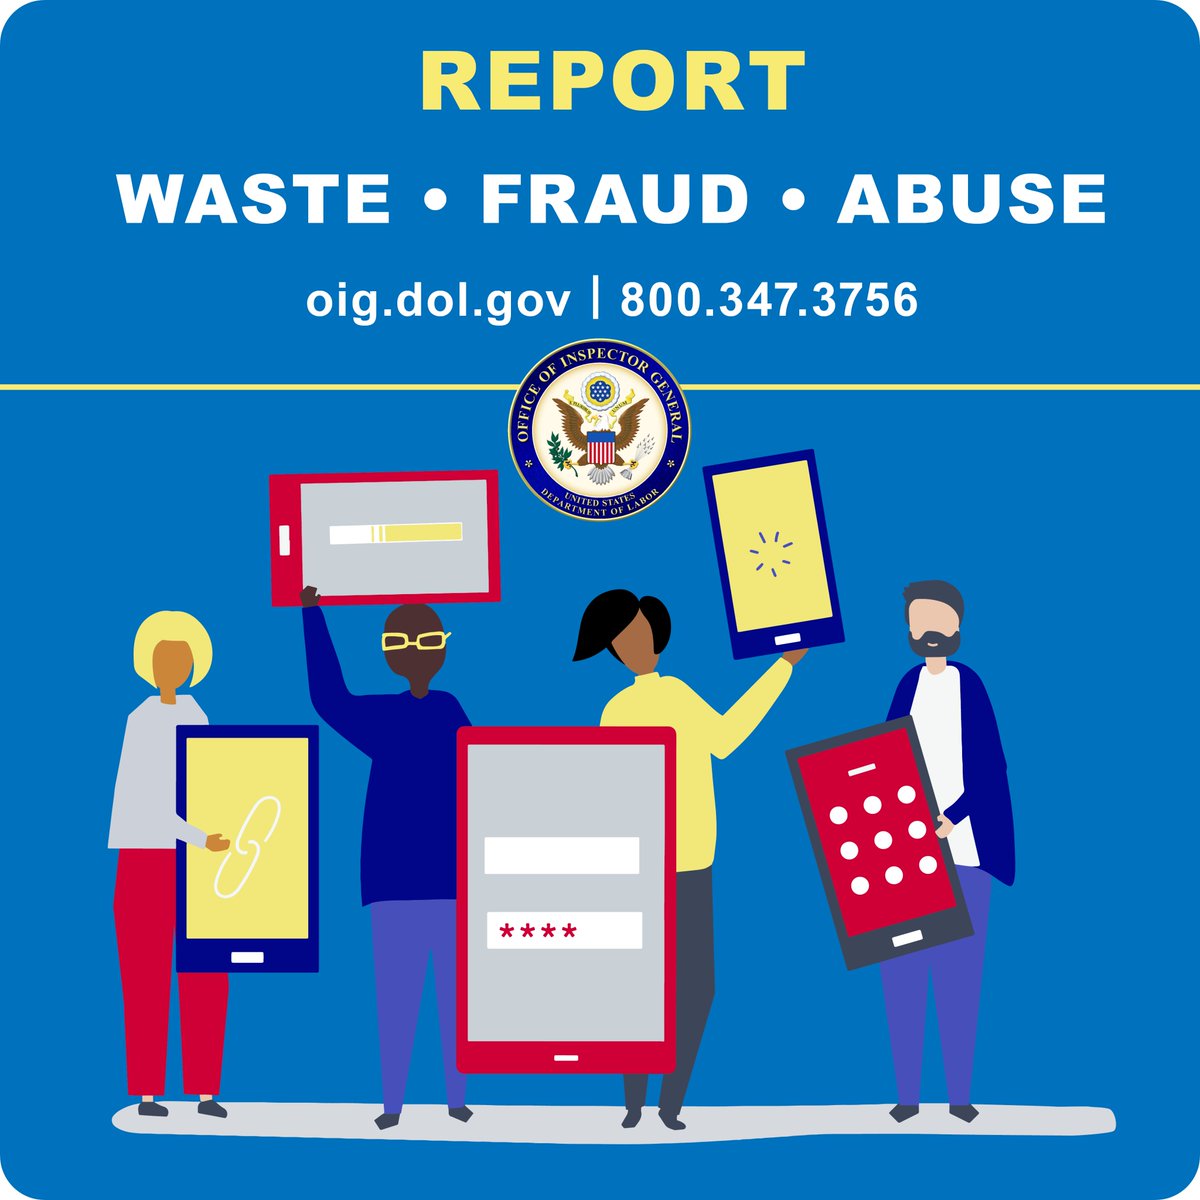 Are you aware of fraud, waste, or abuse in a Department of Labor program or operation? Follow the link to file a Hotline complaint: oig.dol.gov/hotlinecontact…